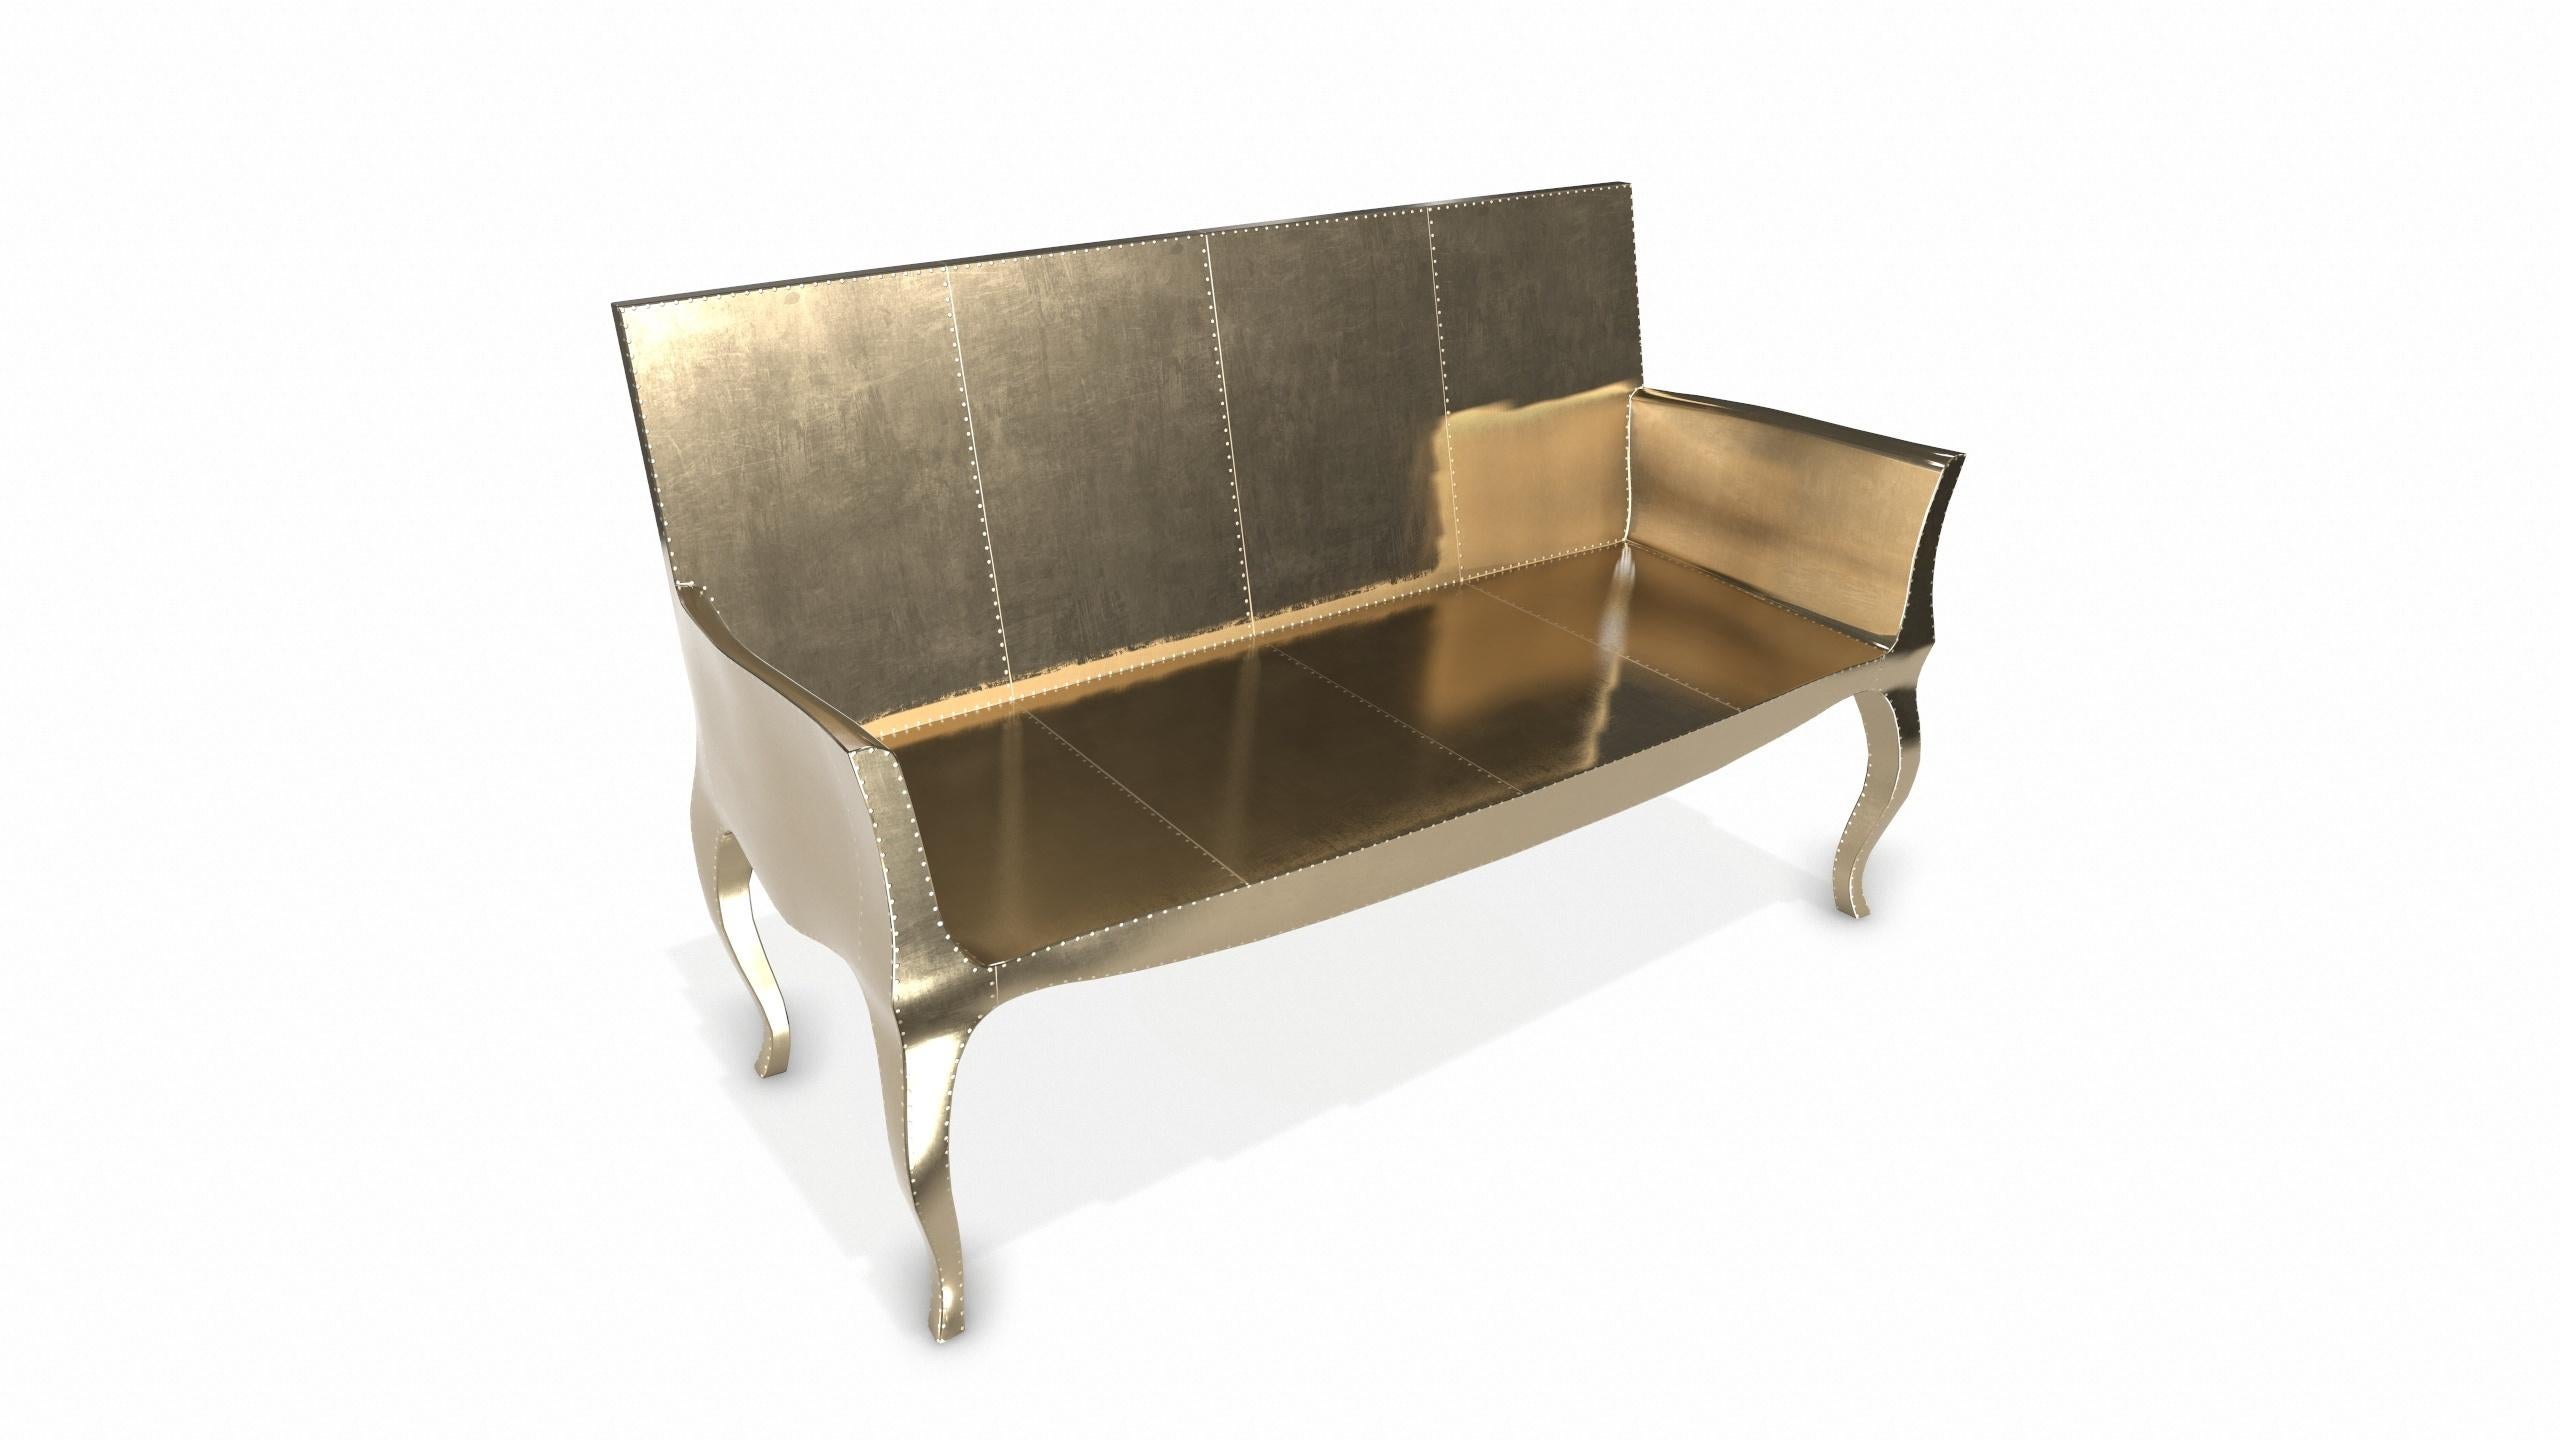 Louise Settee Art Deco Benches in Smooth Brass by Paul Mathieu for S Odegard For Sale 2